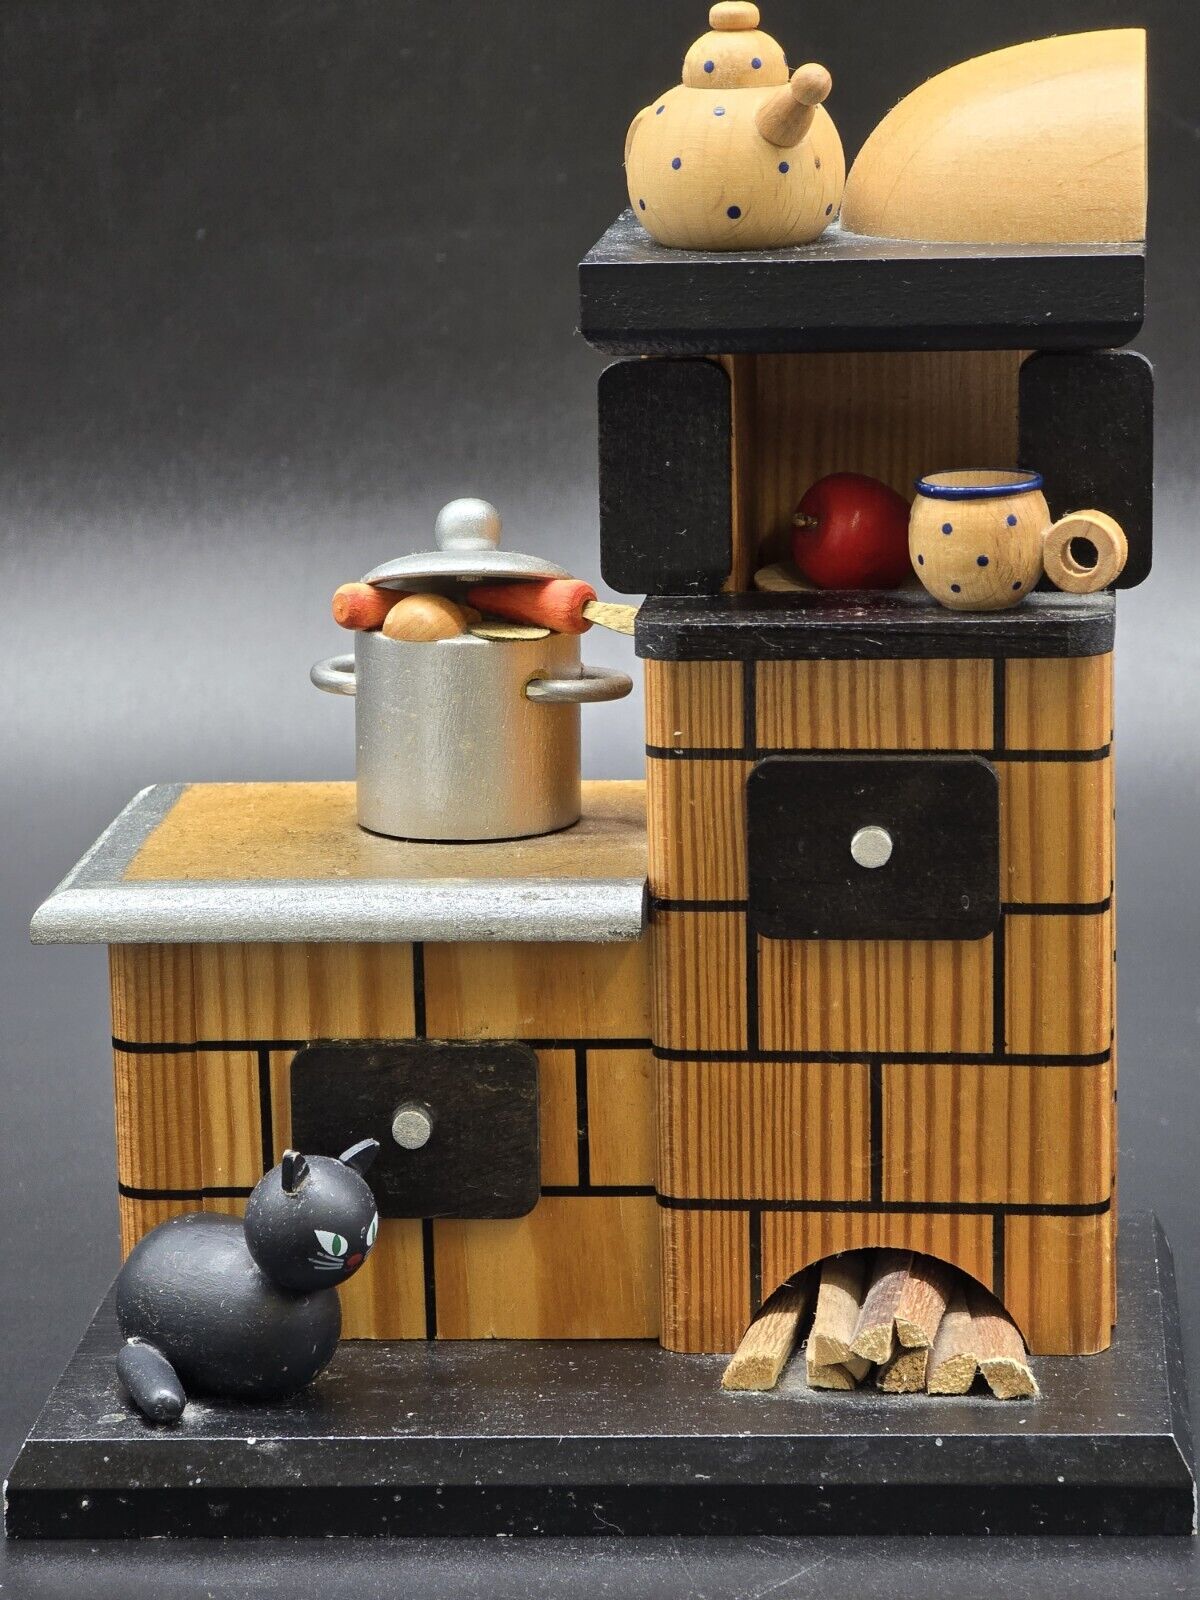 KWO Wooden Stove Incense Burner - Incense Smoker Black Cat - Made In Germany